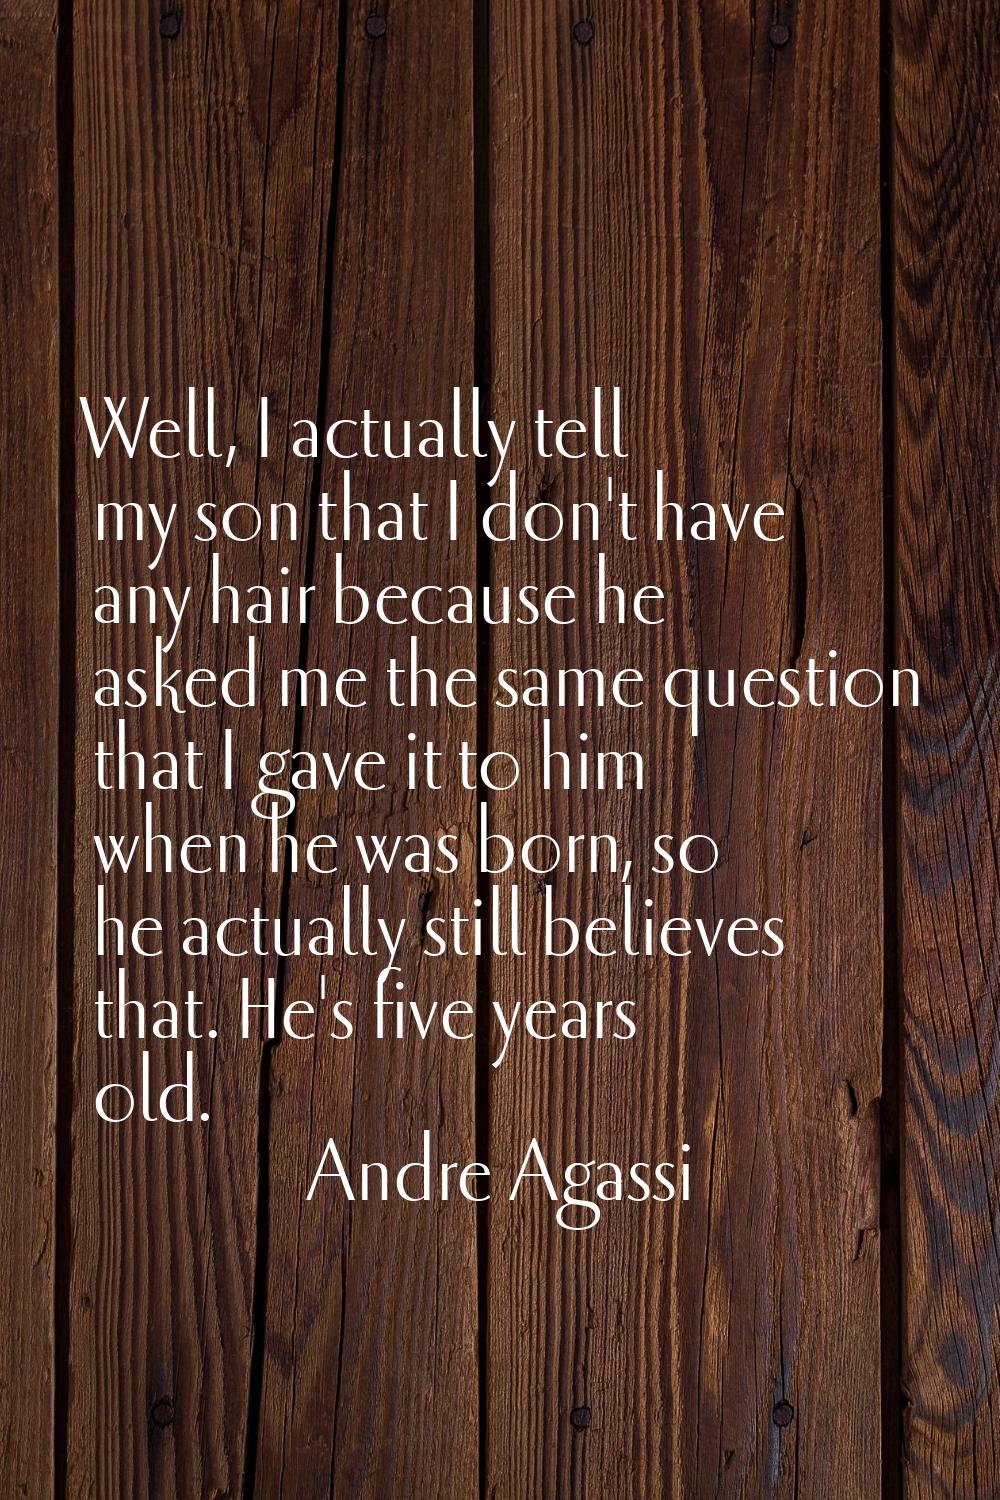 Well, I actually tell my son that I don't have any hair because he asked me the same question that 